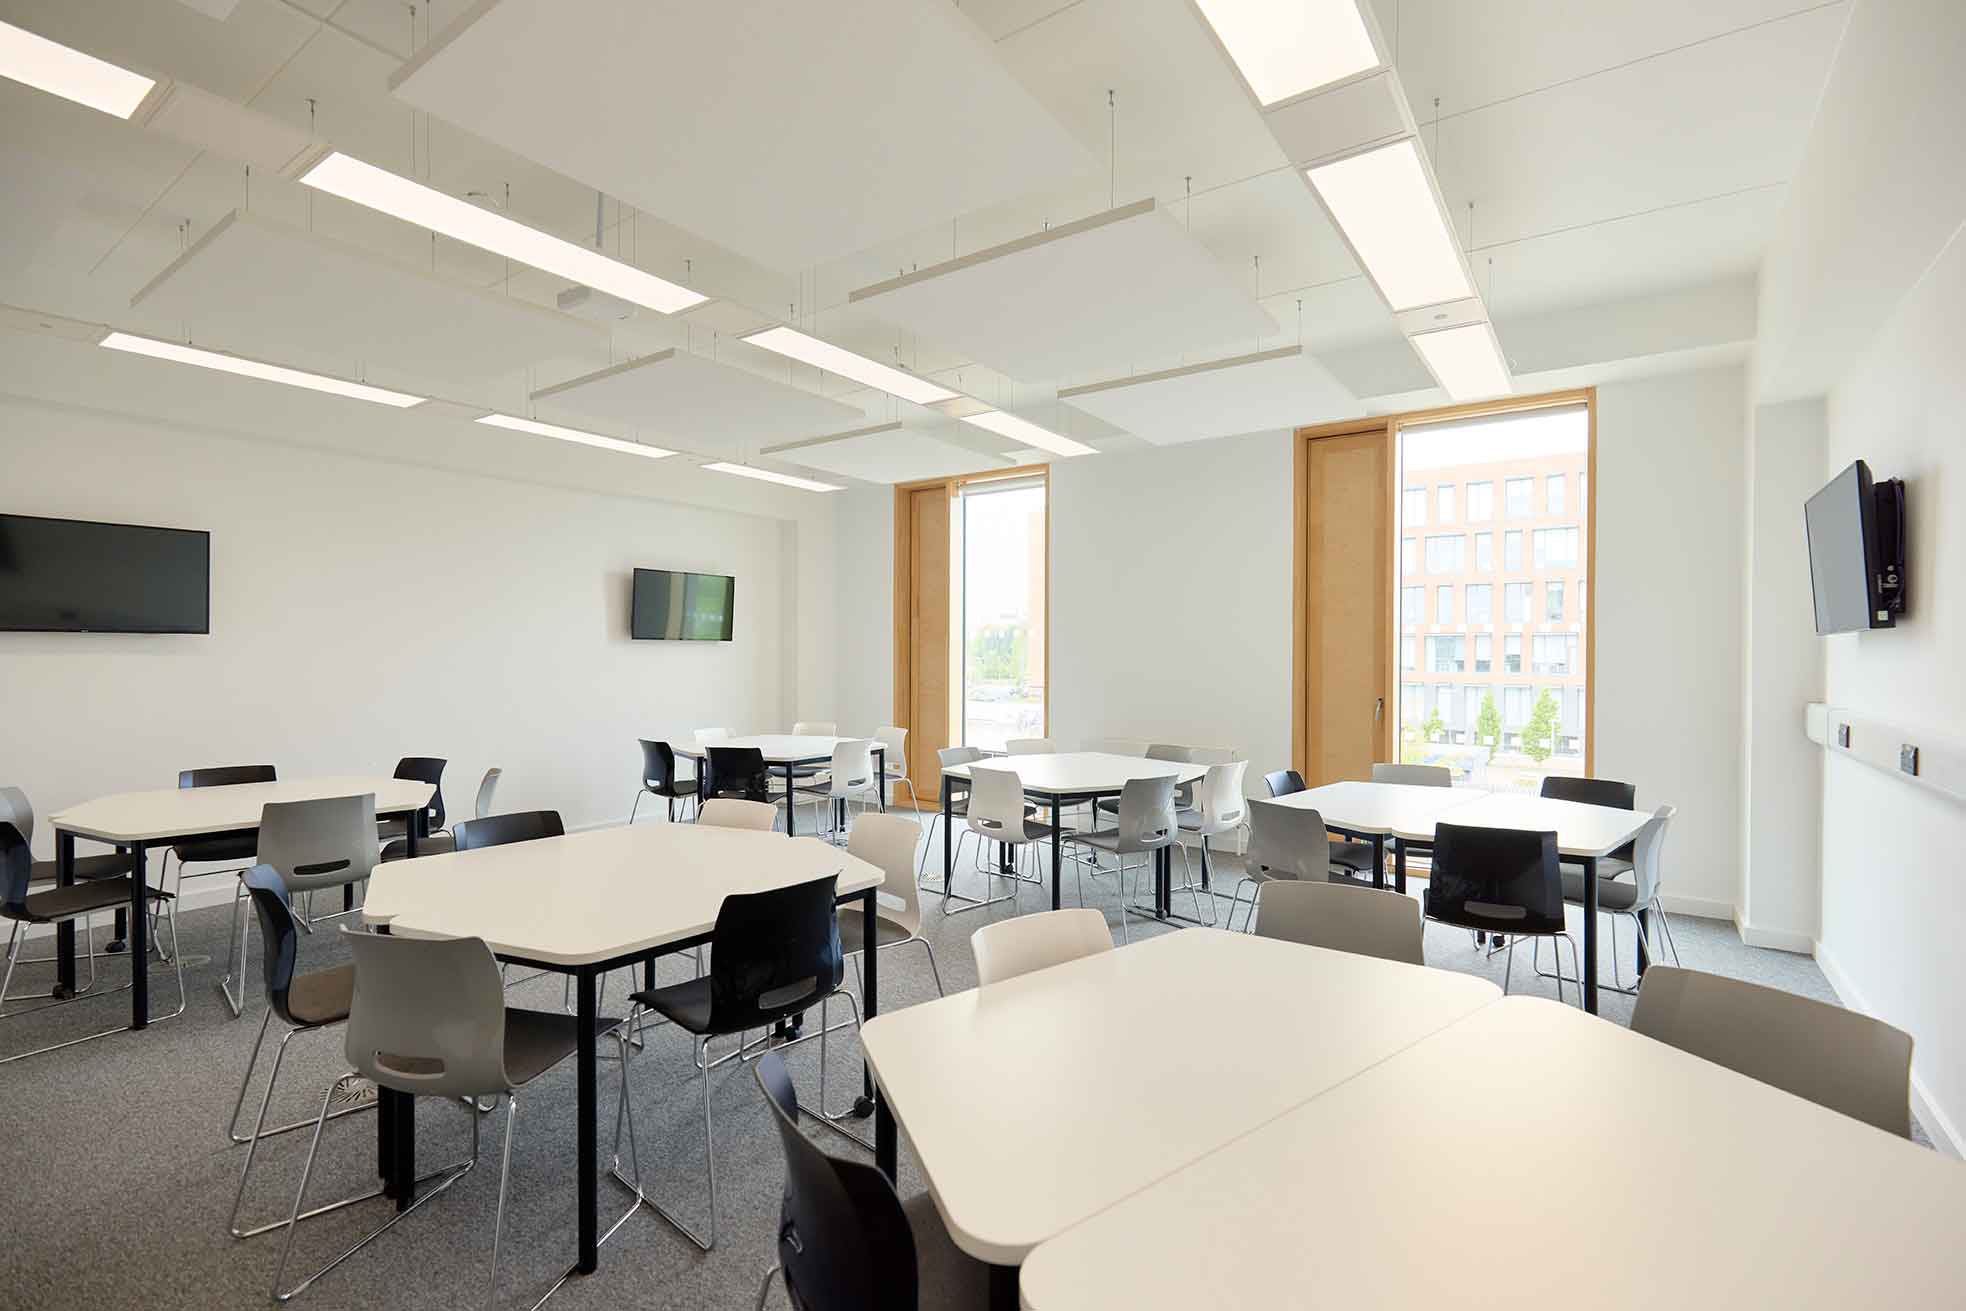 The picture shows a classroom in the Learning Hub with large white tables and a mixture of grey, black and white chairs. There are three digital monitors on the walls and floor-to-ceiling windows